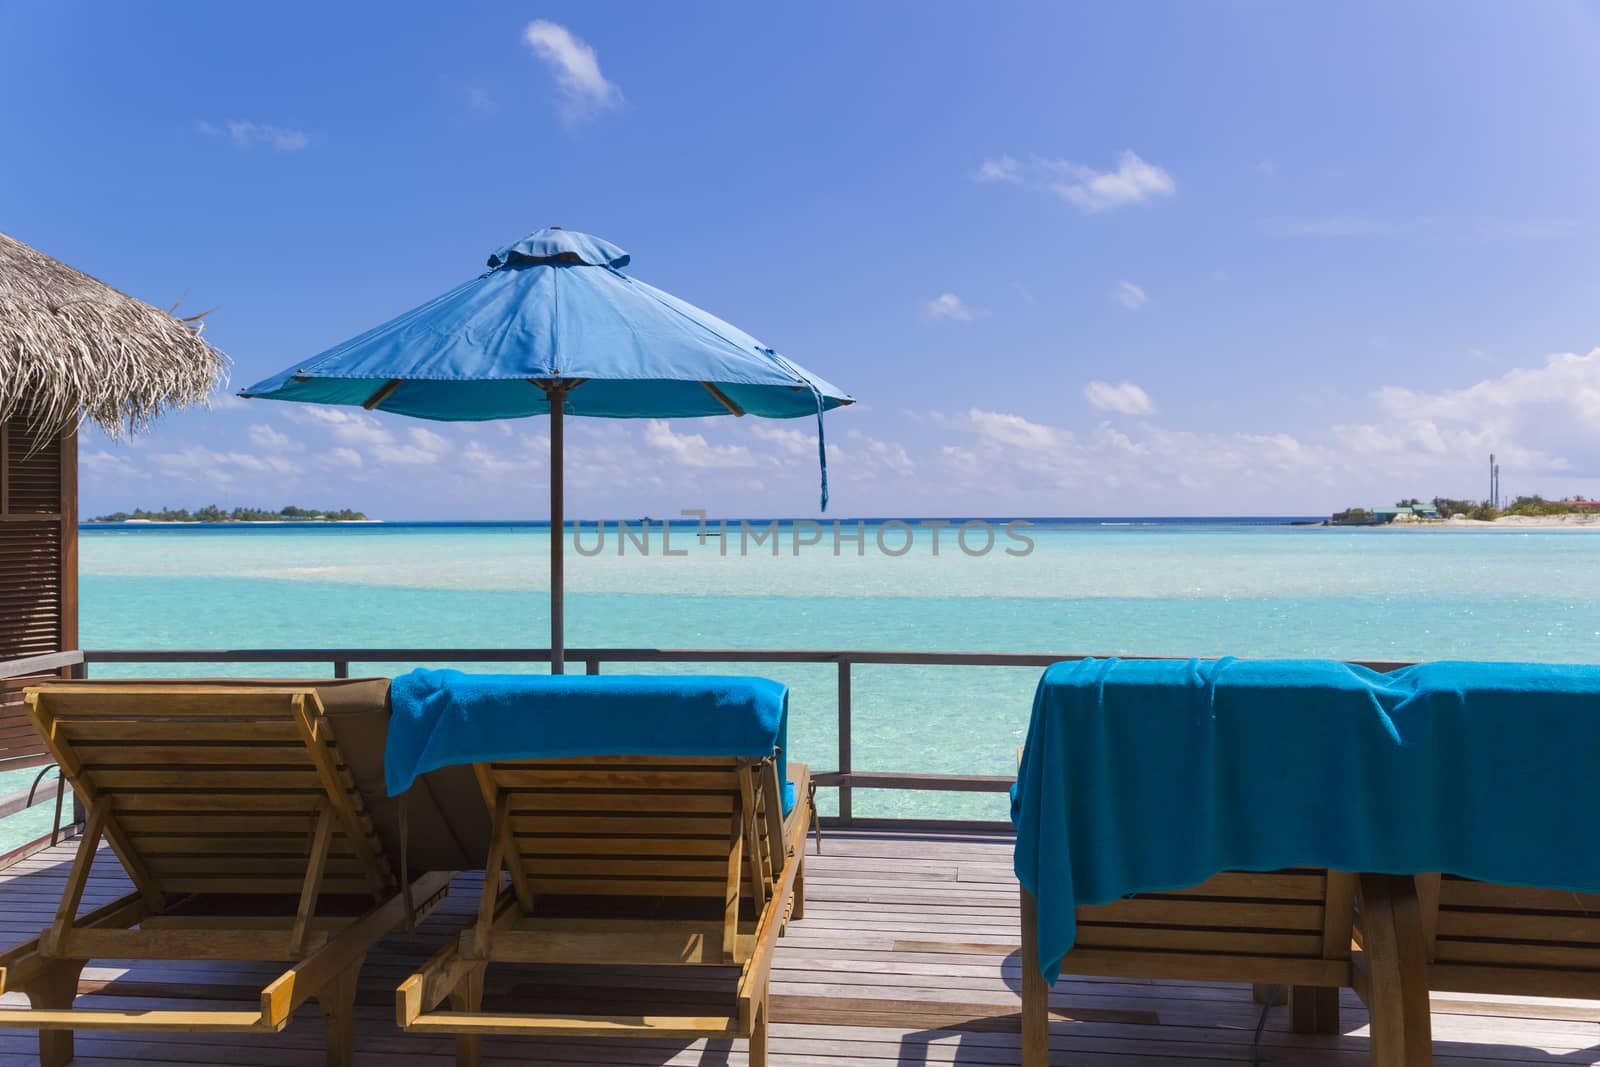 View from the deck of the bungalow  in The Maldives. On the deck there are deck chairs and beach umbrella. It is a beuatiful view of the sea, the water is clear, turquoise and in a strong contrast depending on the depth.